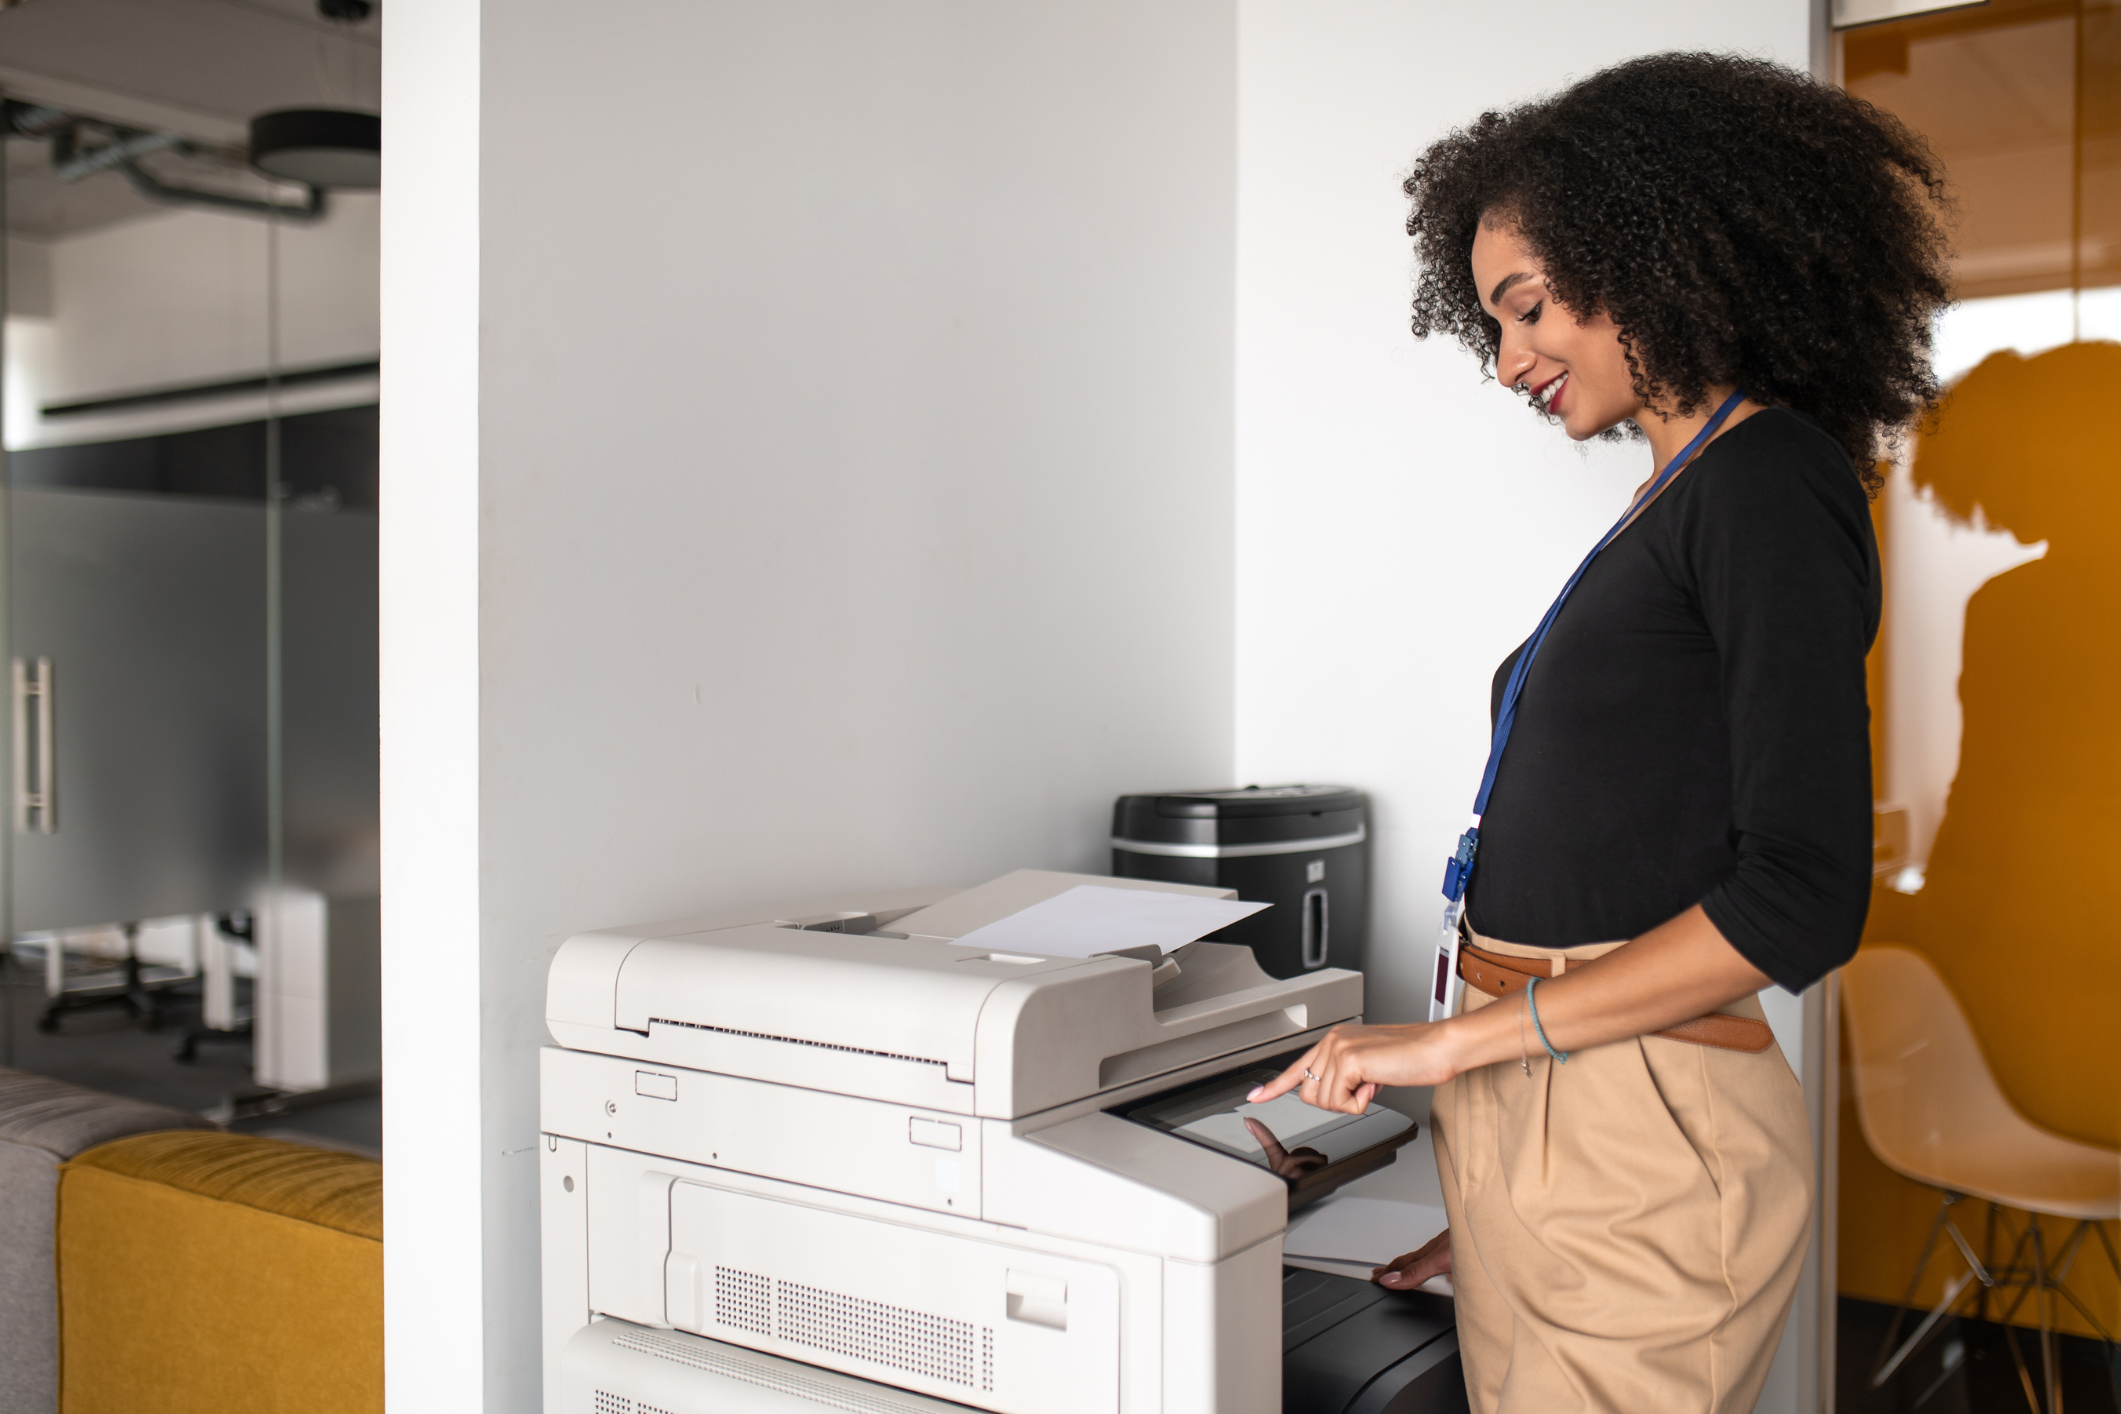 A business woman stands at an office copier interacting with the interface signifying printer service